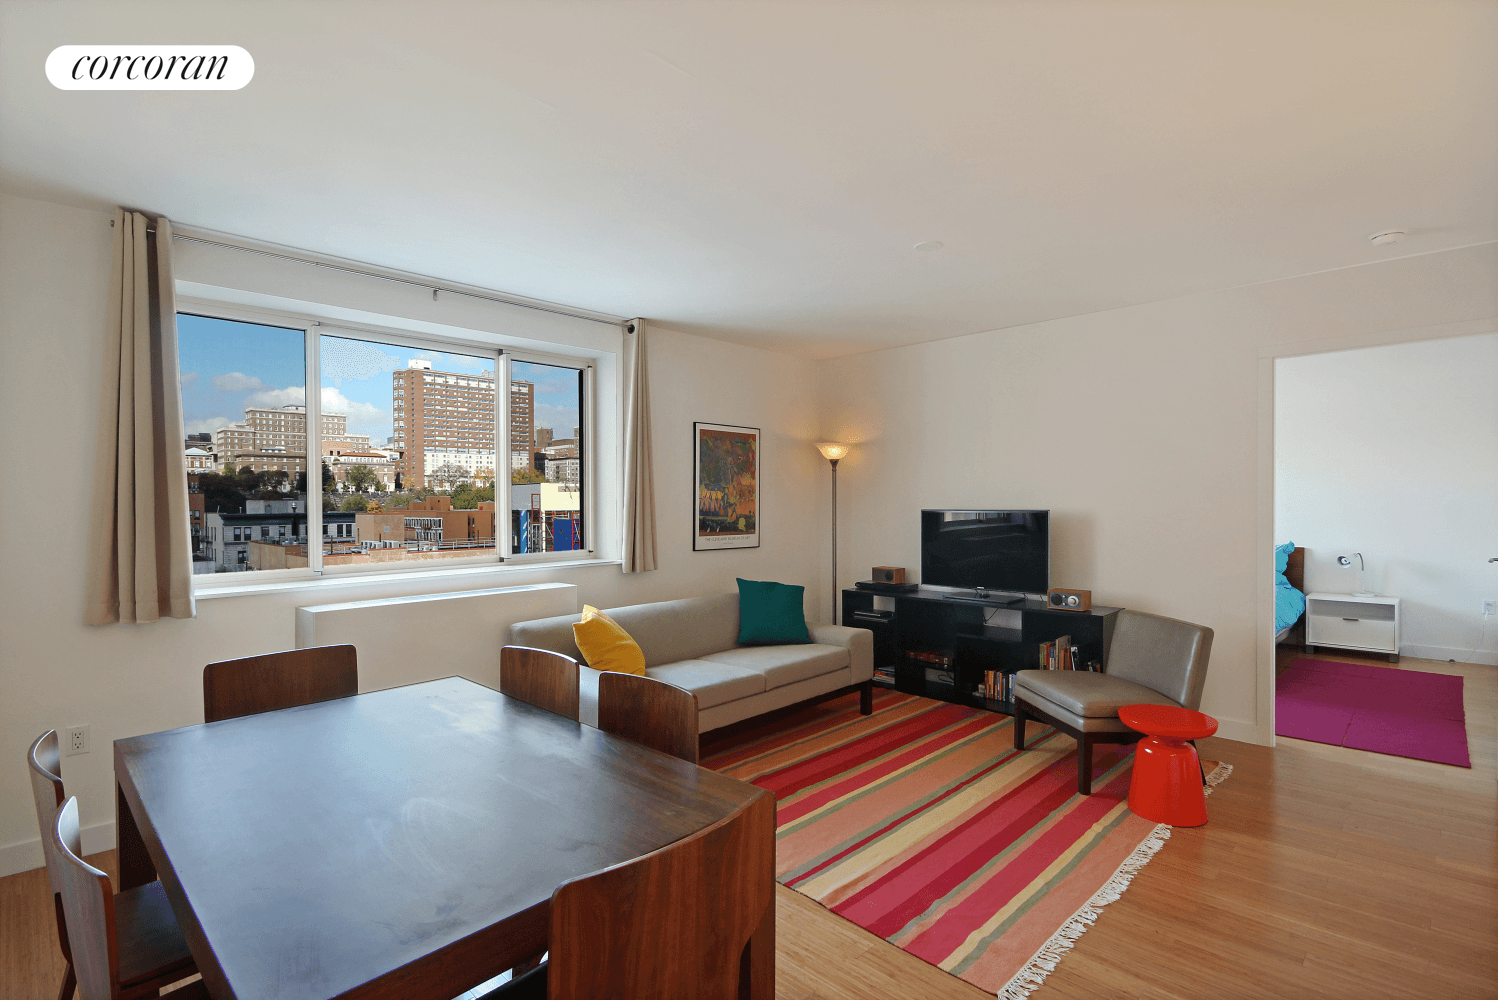 Fabulous one bedroom home with views of Morningside Park and the Cathedral of St.